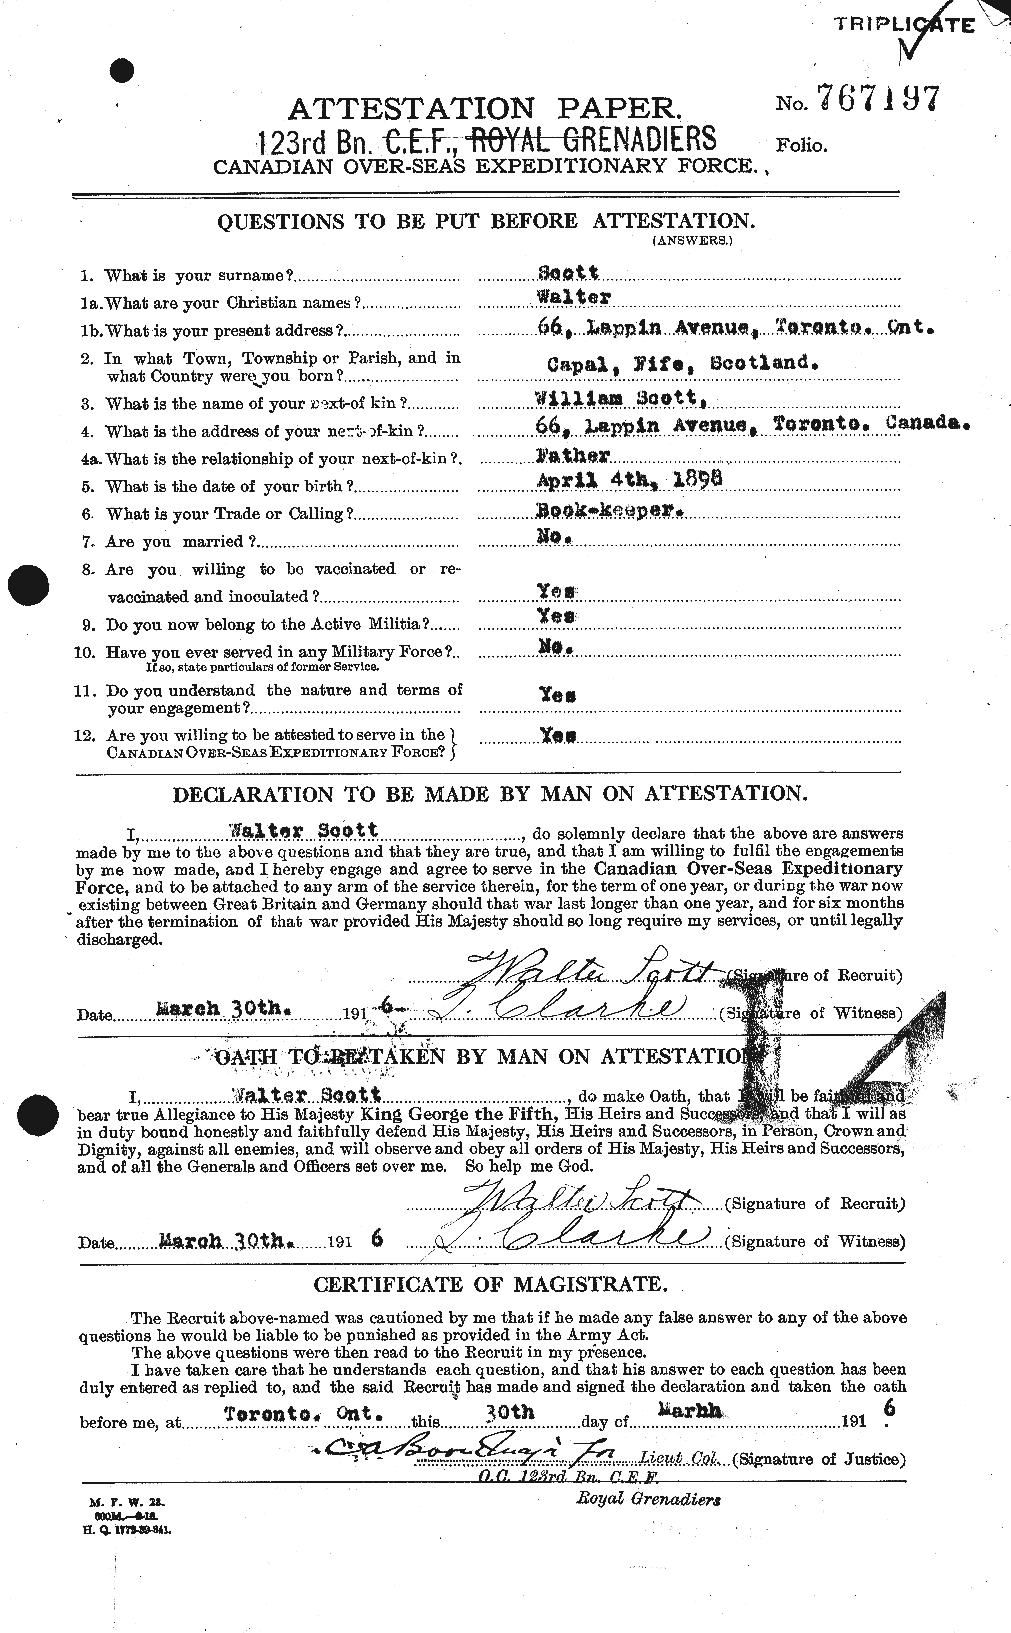 Personnel Records of the First World War - CEF 088018a